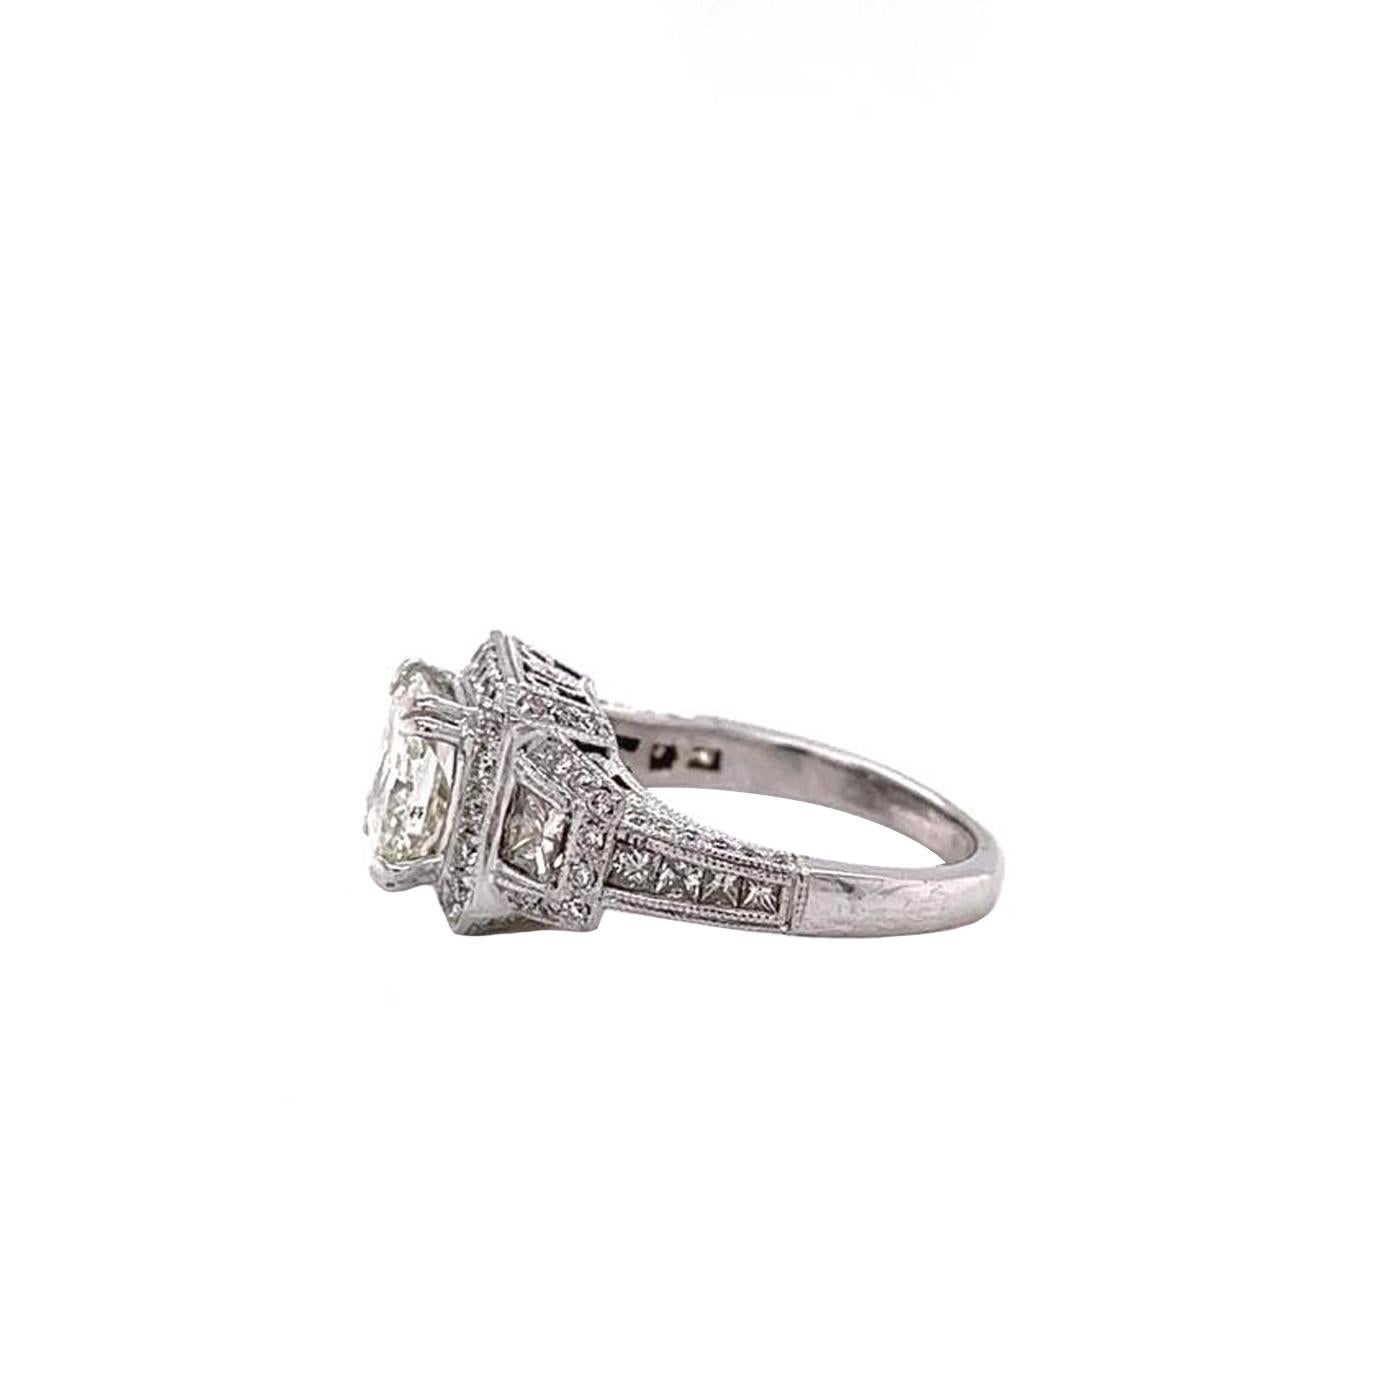 Modernist Exceptional GIA Graded 2.02 Carat Cushion Diamond Ring with 0.68ct Pave 14k Gold For Sale